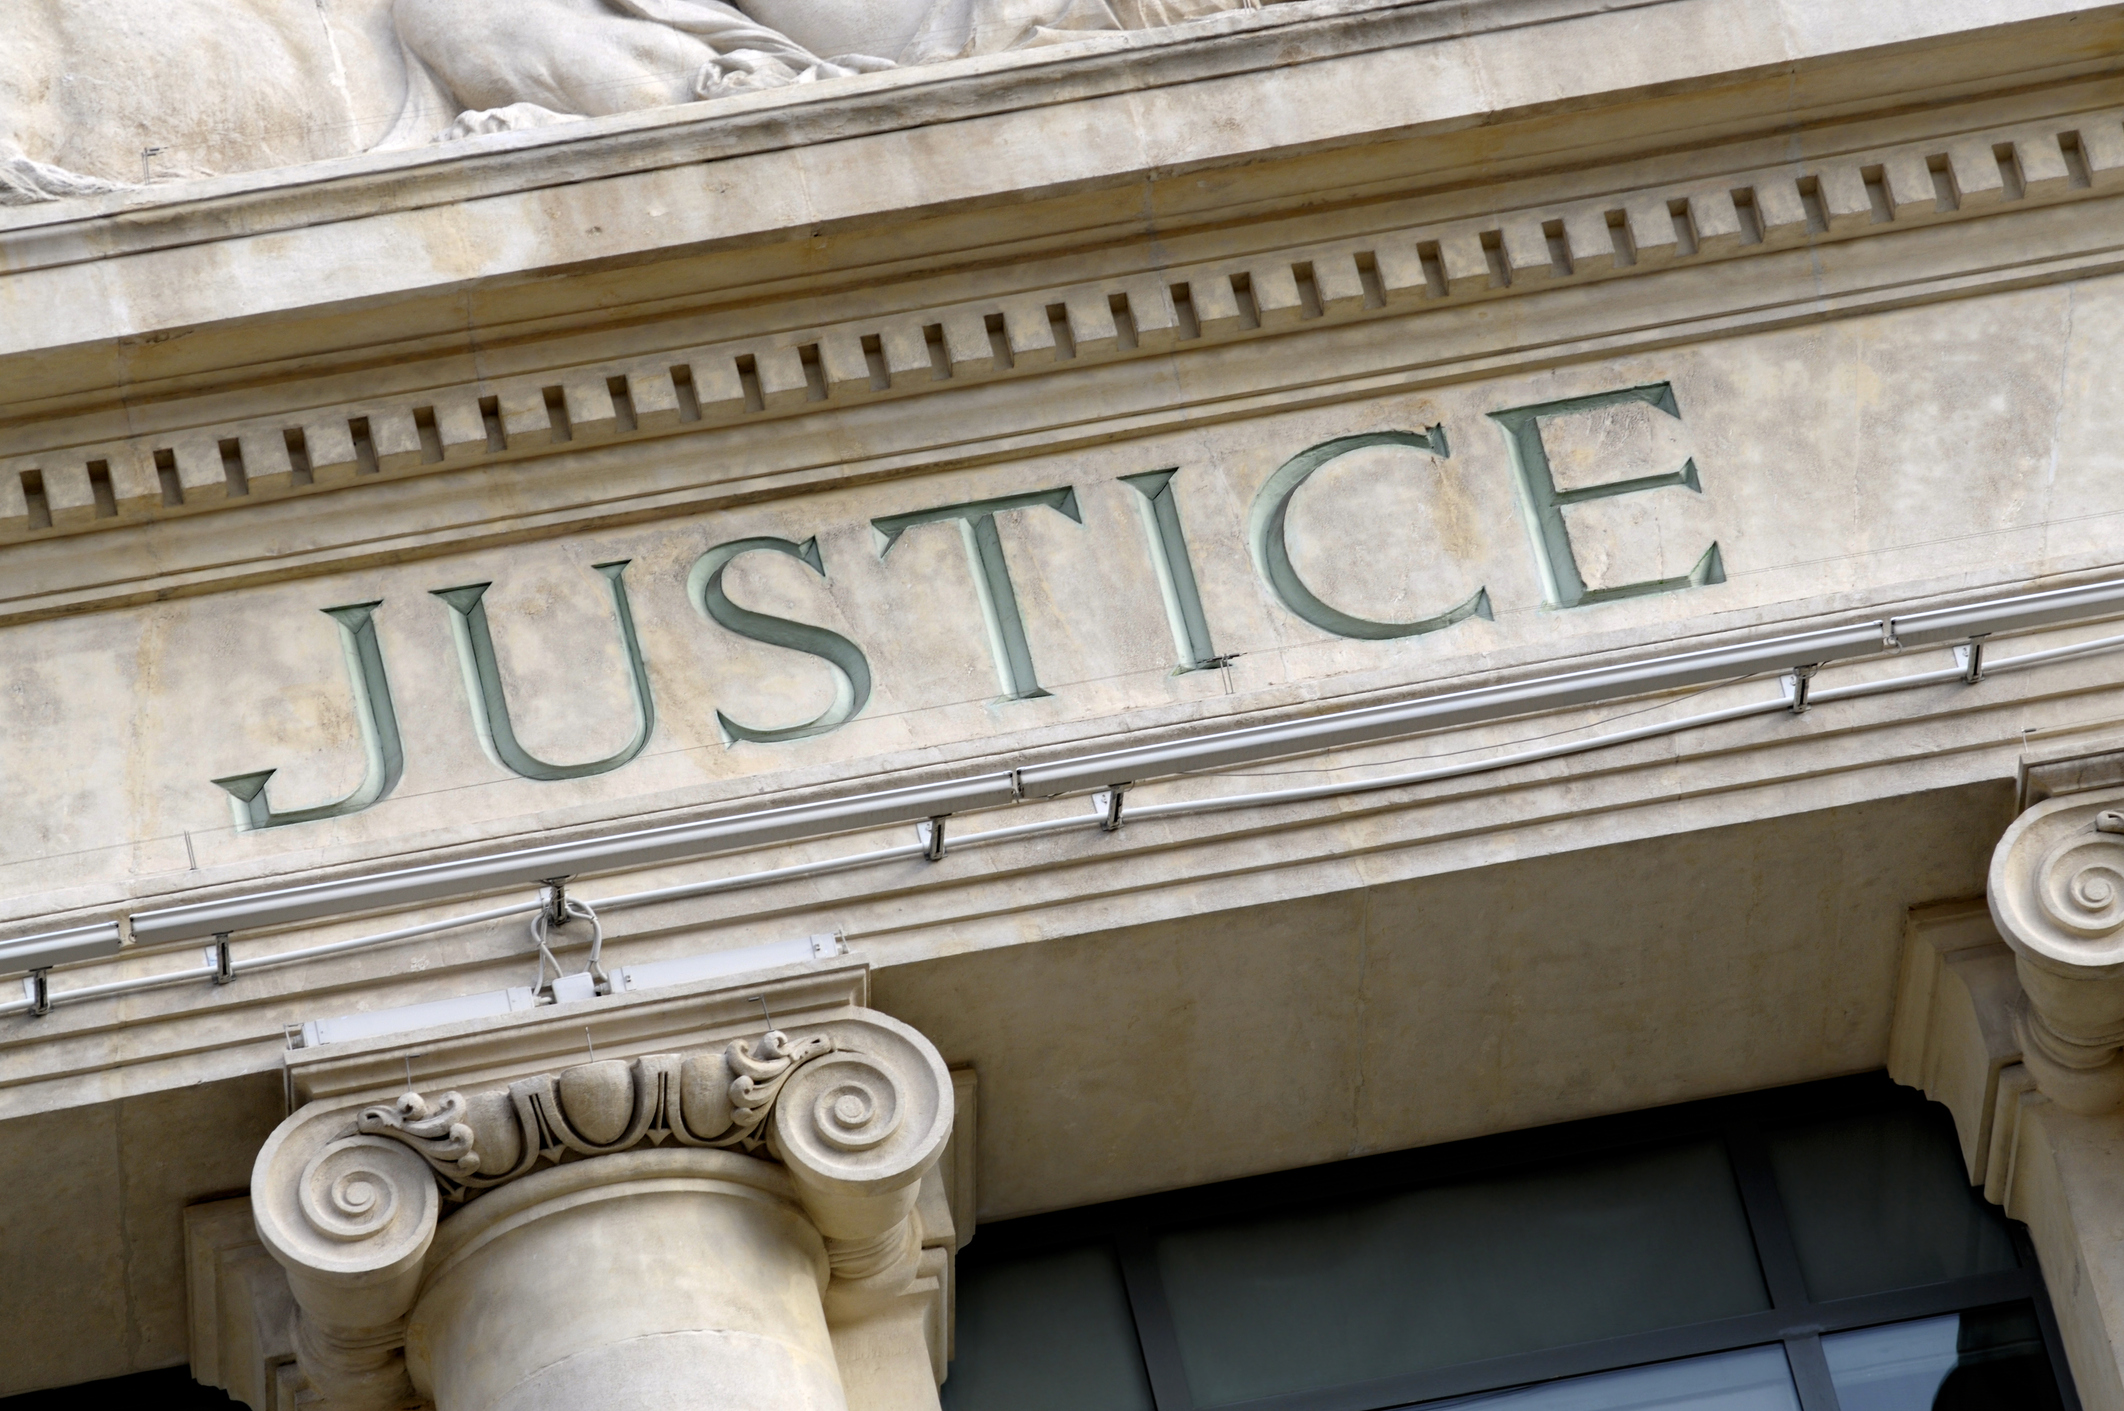 Justice sign on a Law Courts building.  New high resolution version shown below: